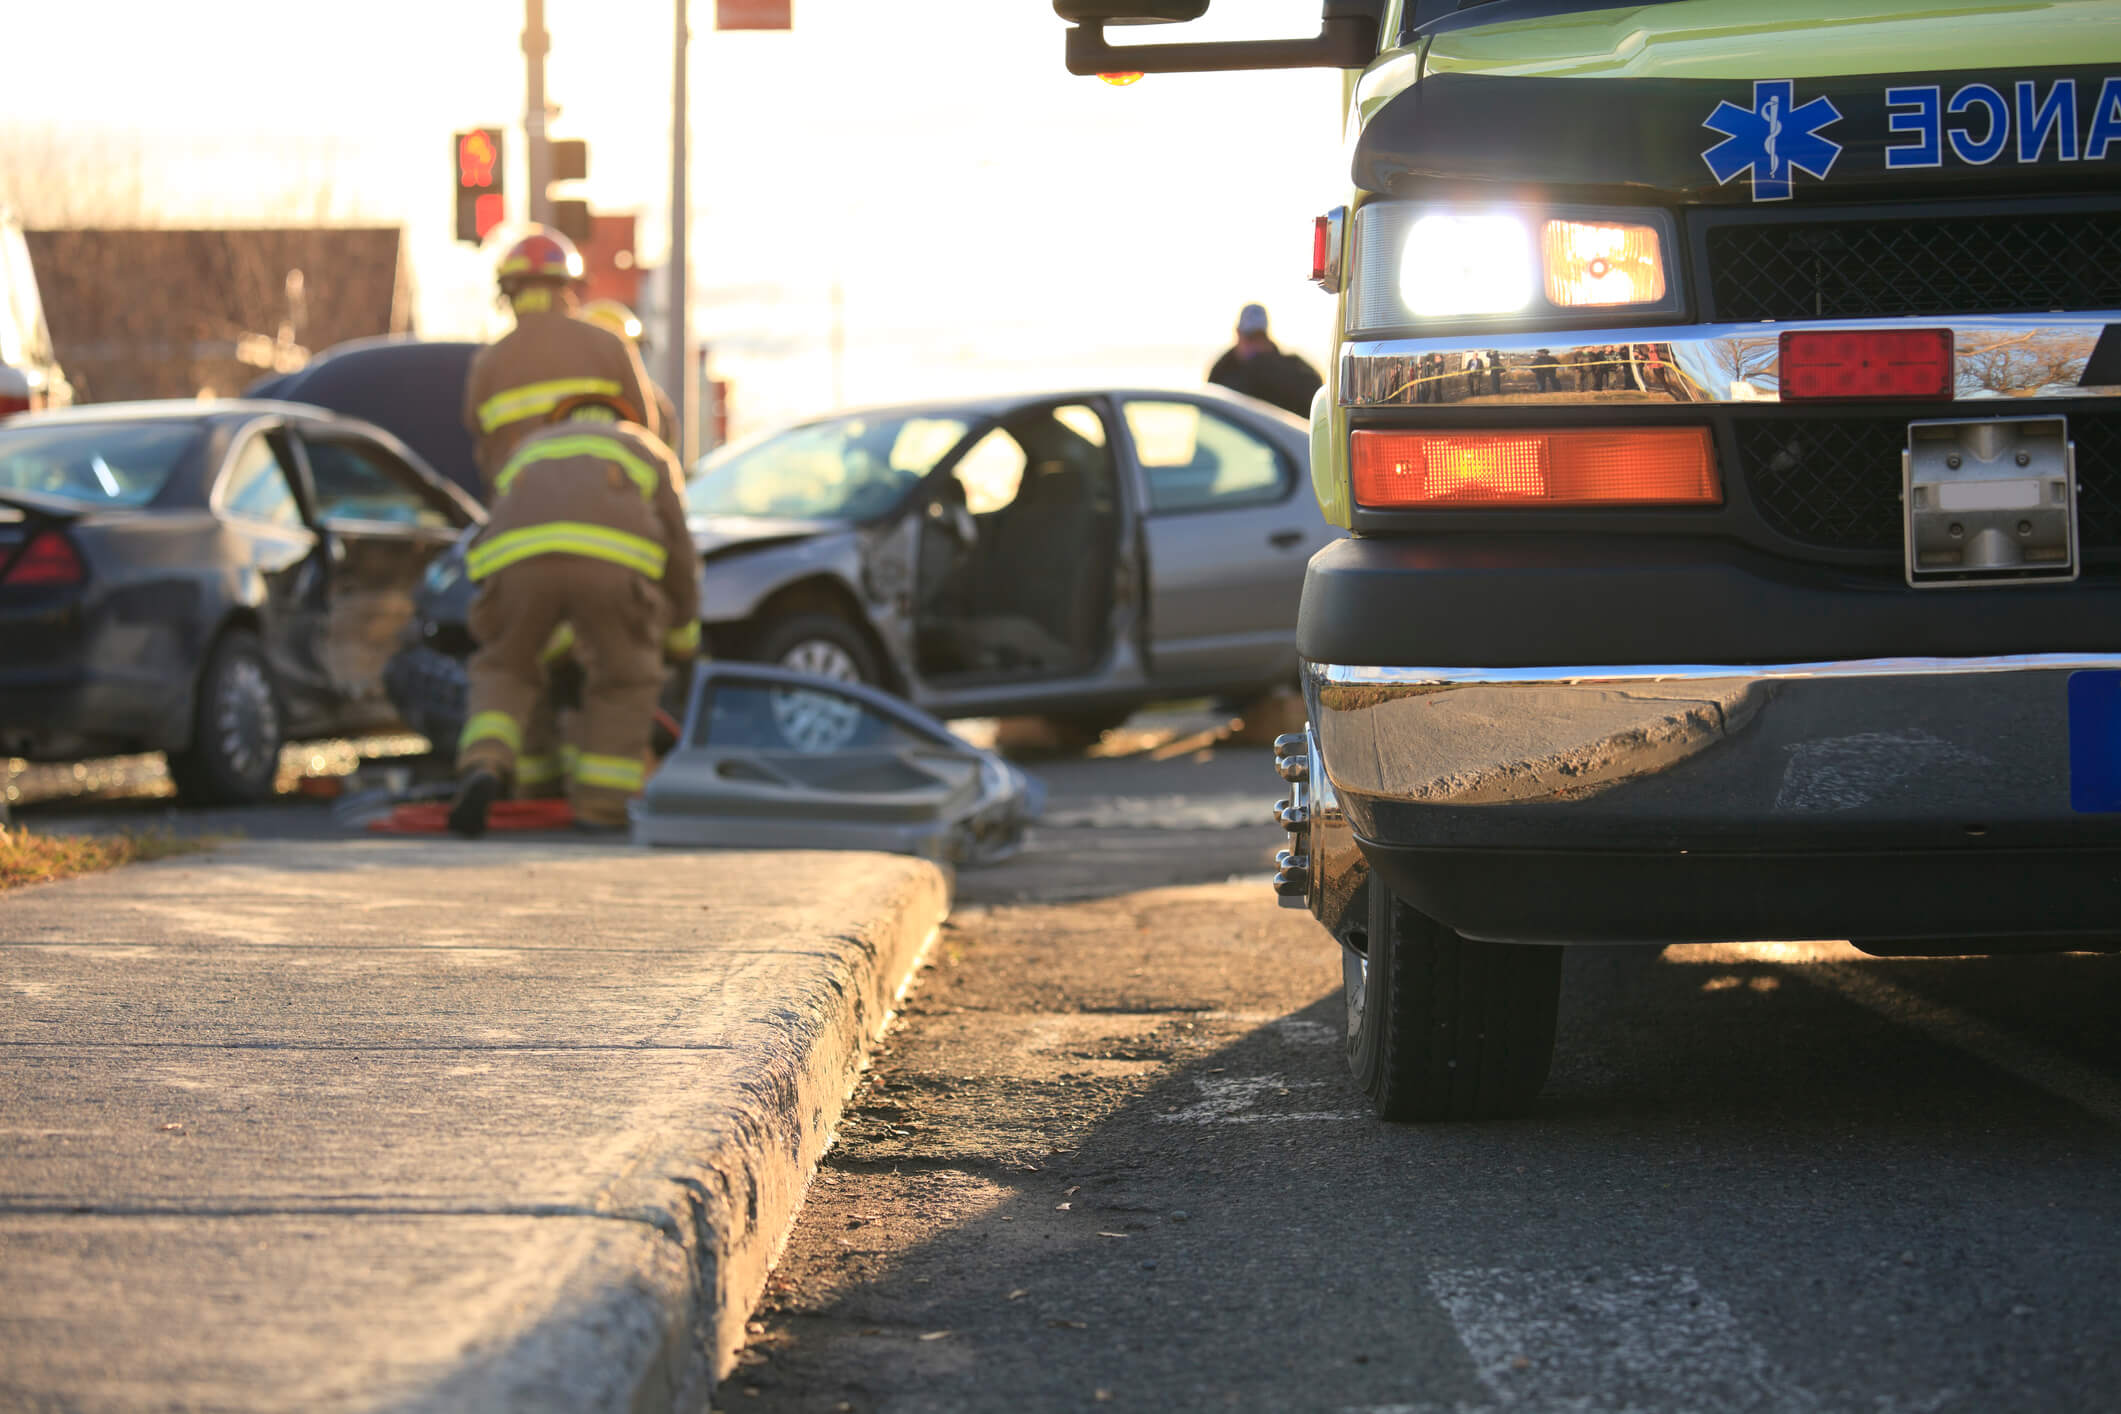 Cummings Law discusses what an injured passenger should do if they have been injured in a car accident.